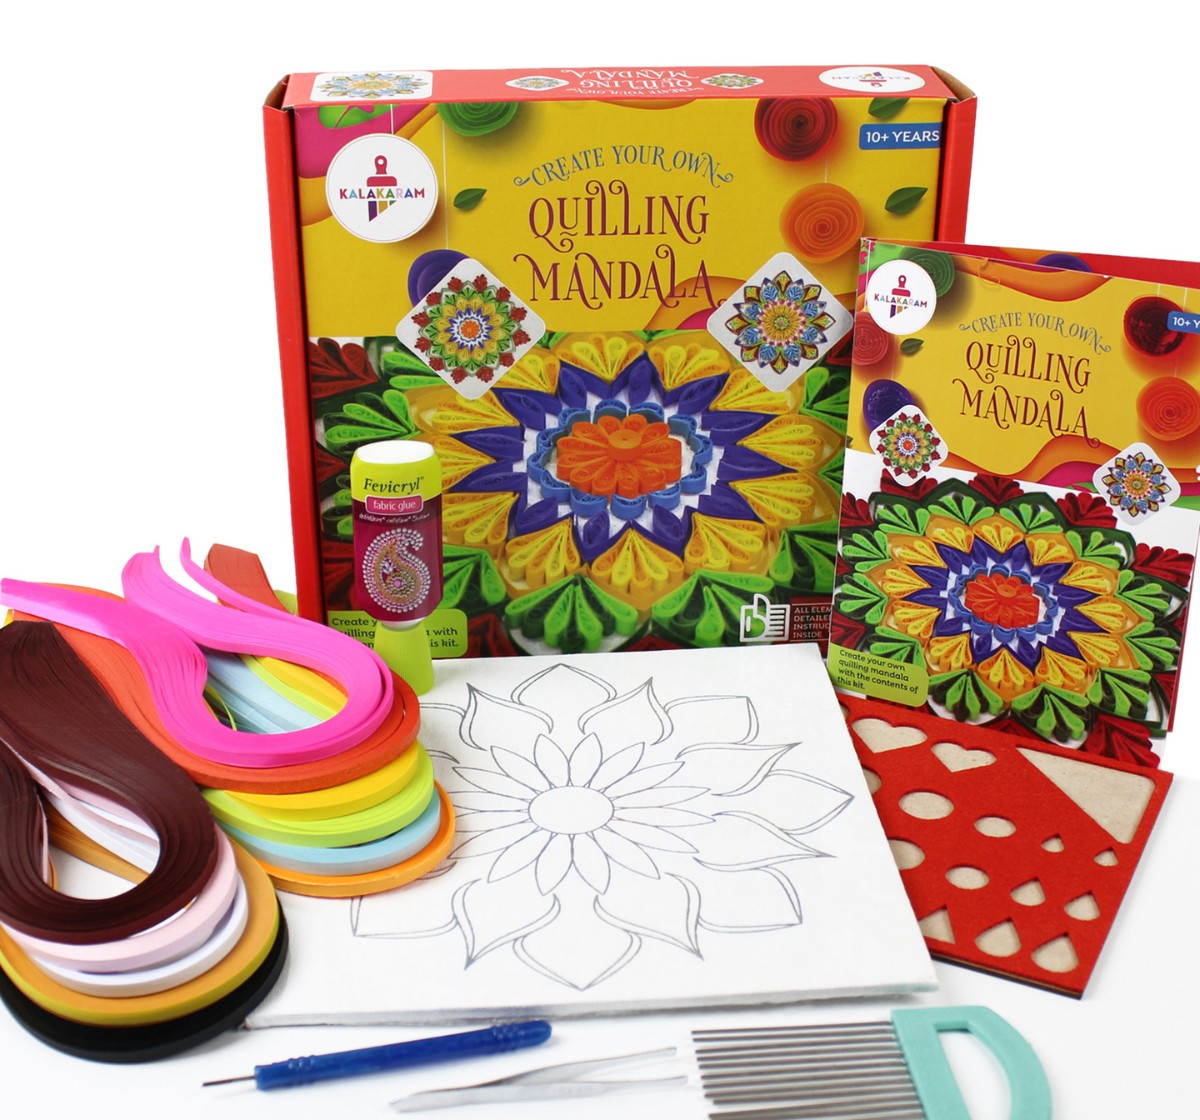 Kalakaram Quilling Mandala Craft Kit, Paper Art and Craft Kit for Girls and Return Gifts, DIY Art and Craft Kit for Kids, 12Y+, Multicolour